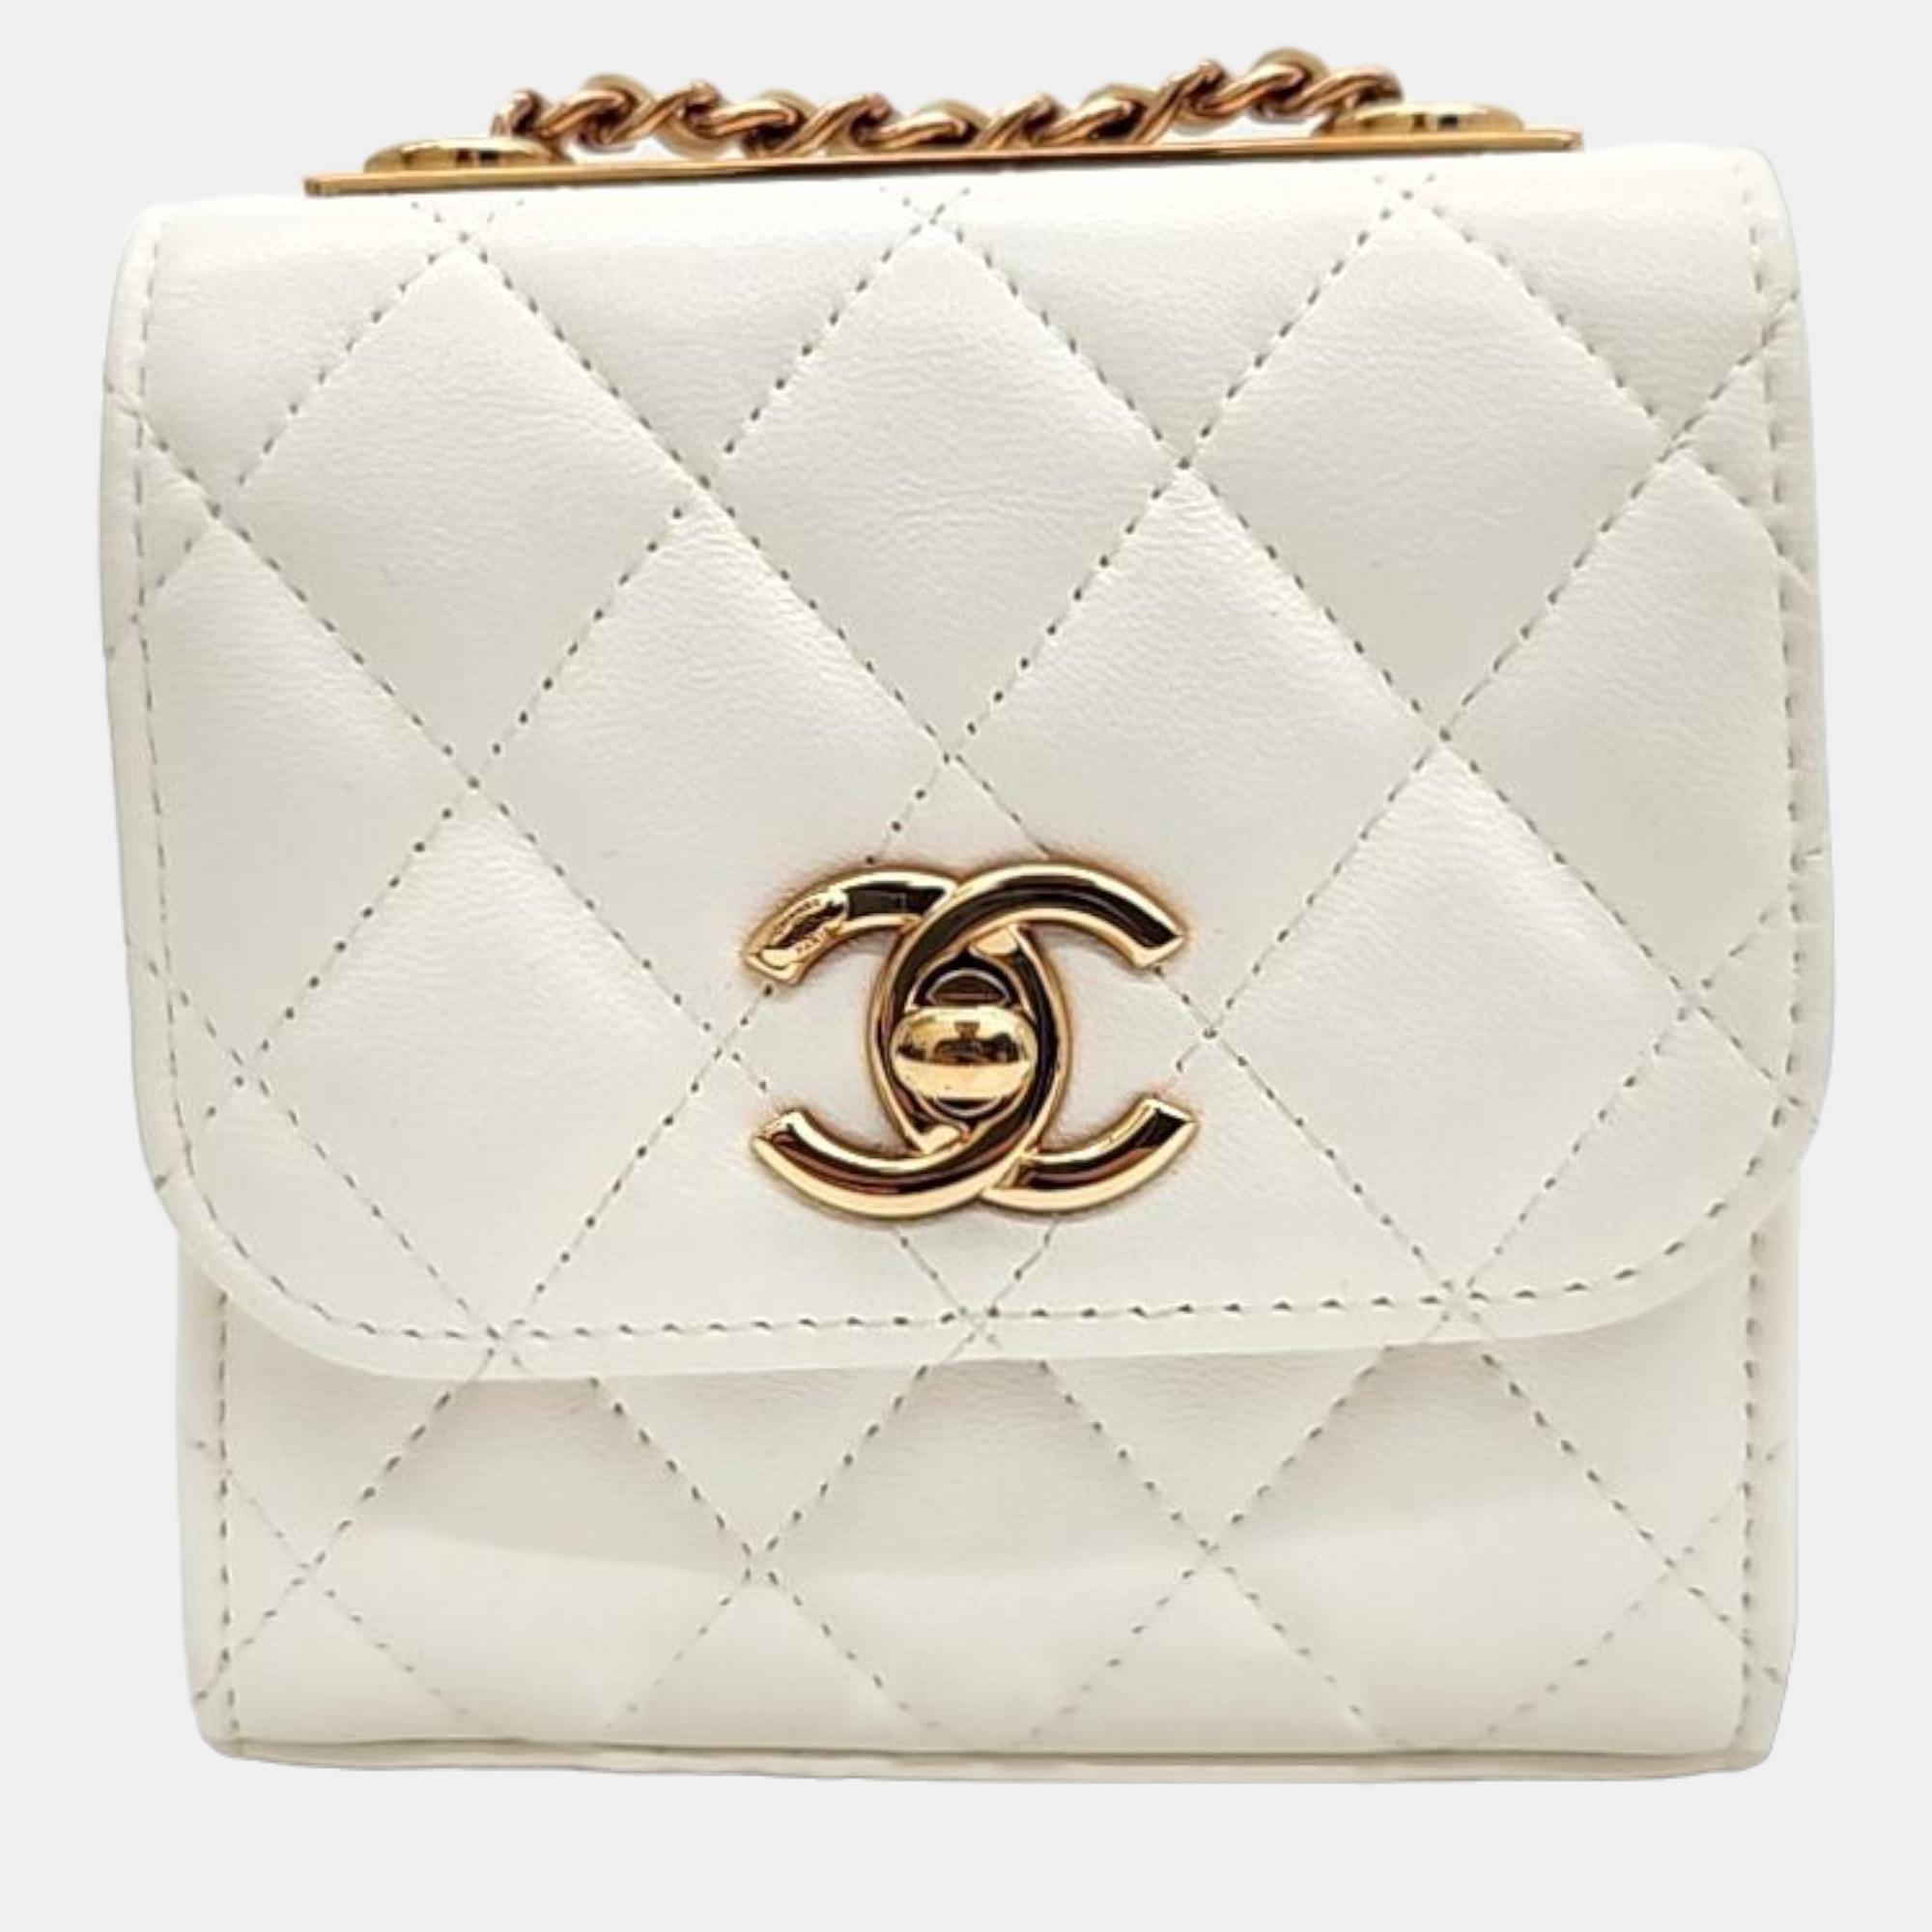 Pre-owned Chanel White Lambskin Leather Mini Trendy Cc Clutch Bag